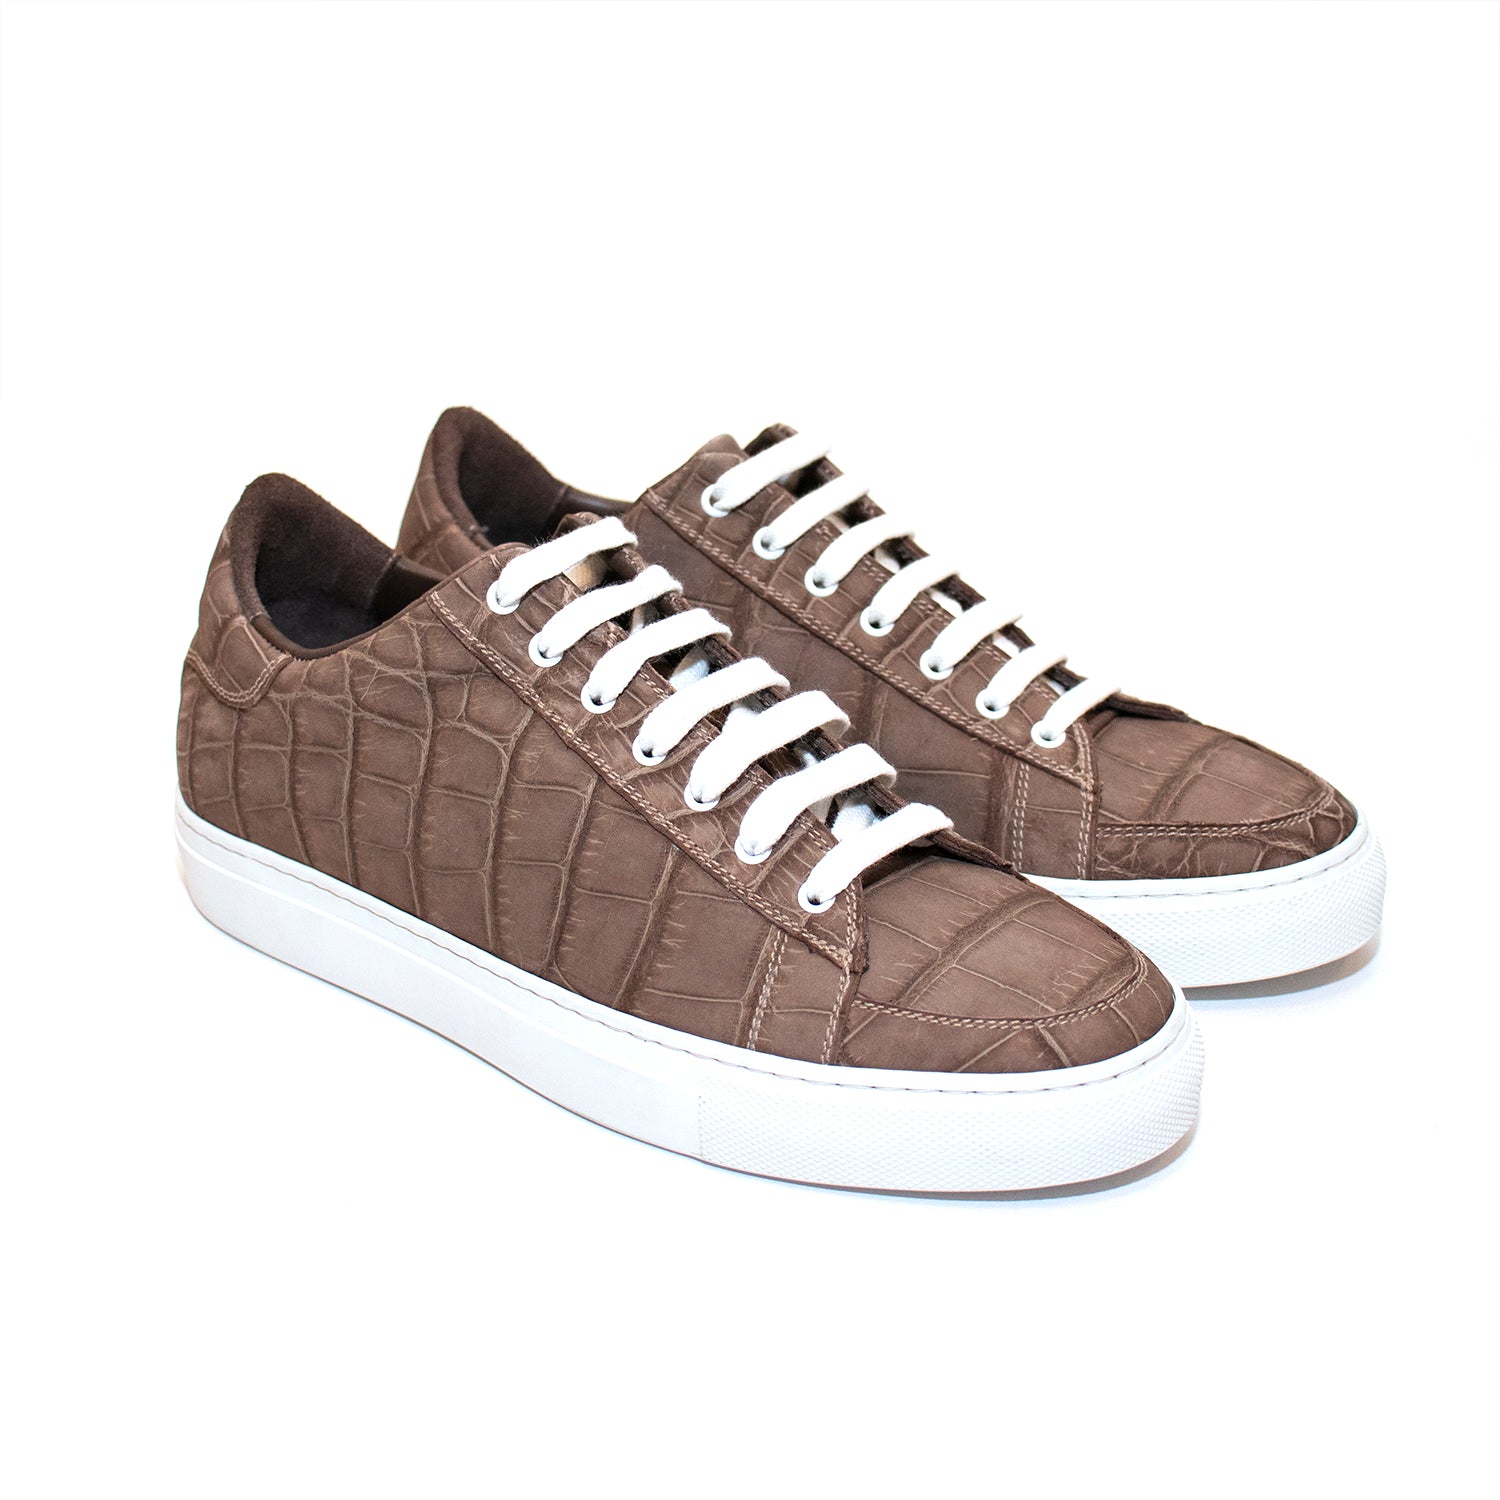 New York Cappuccino Sneakers